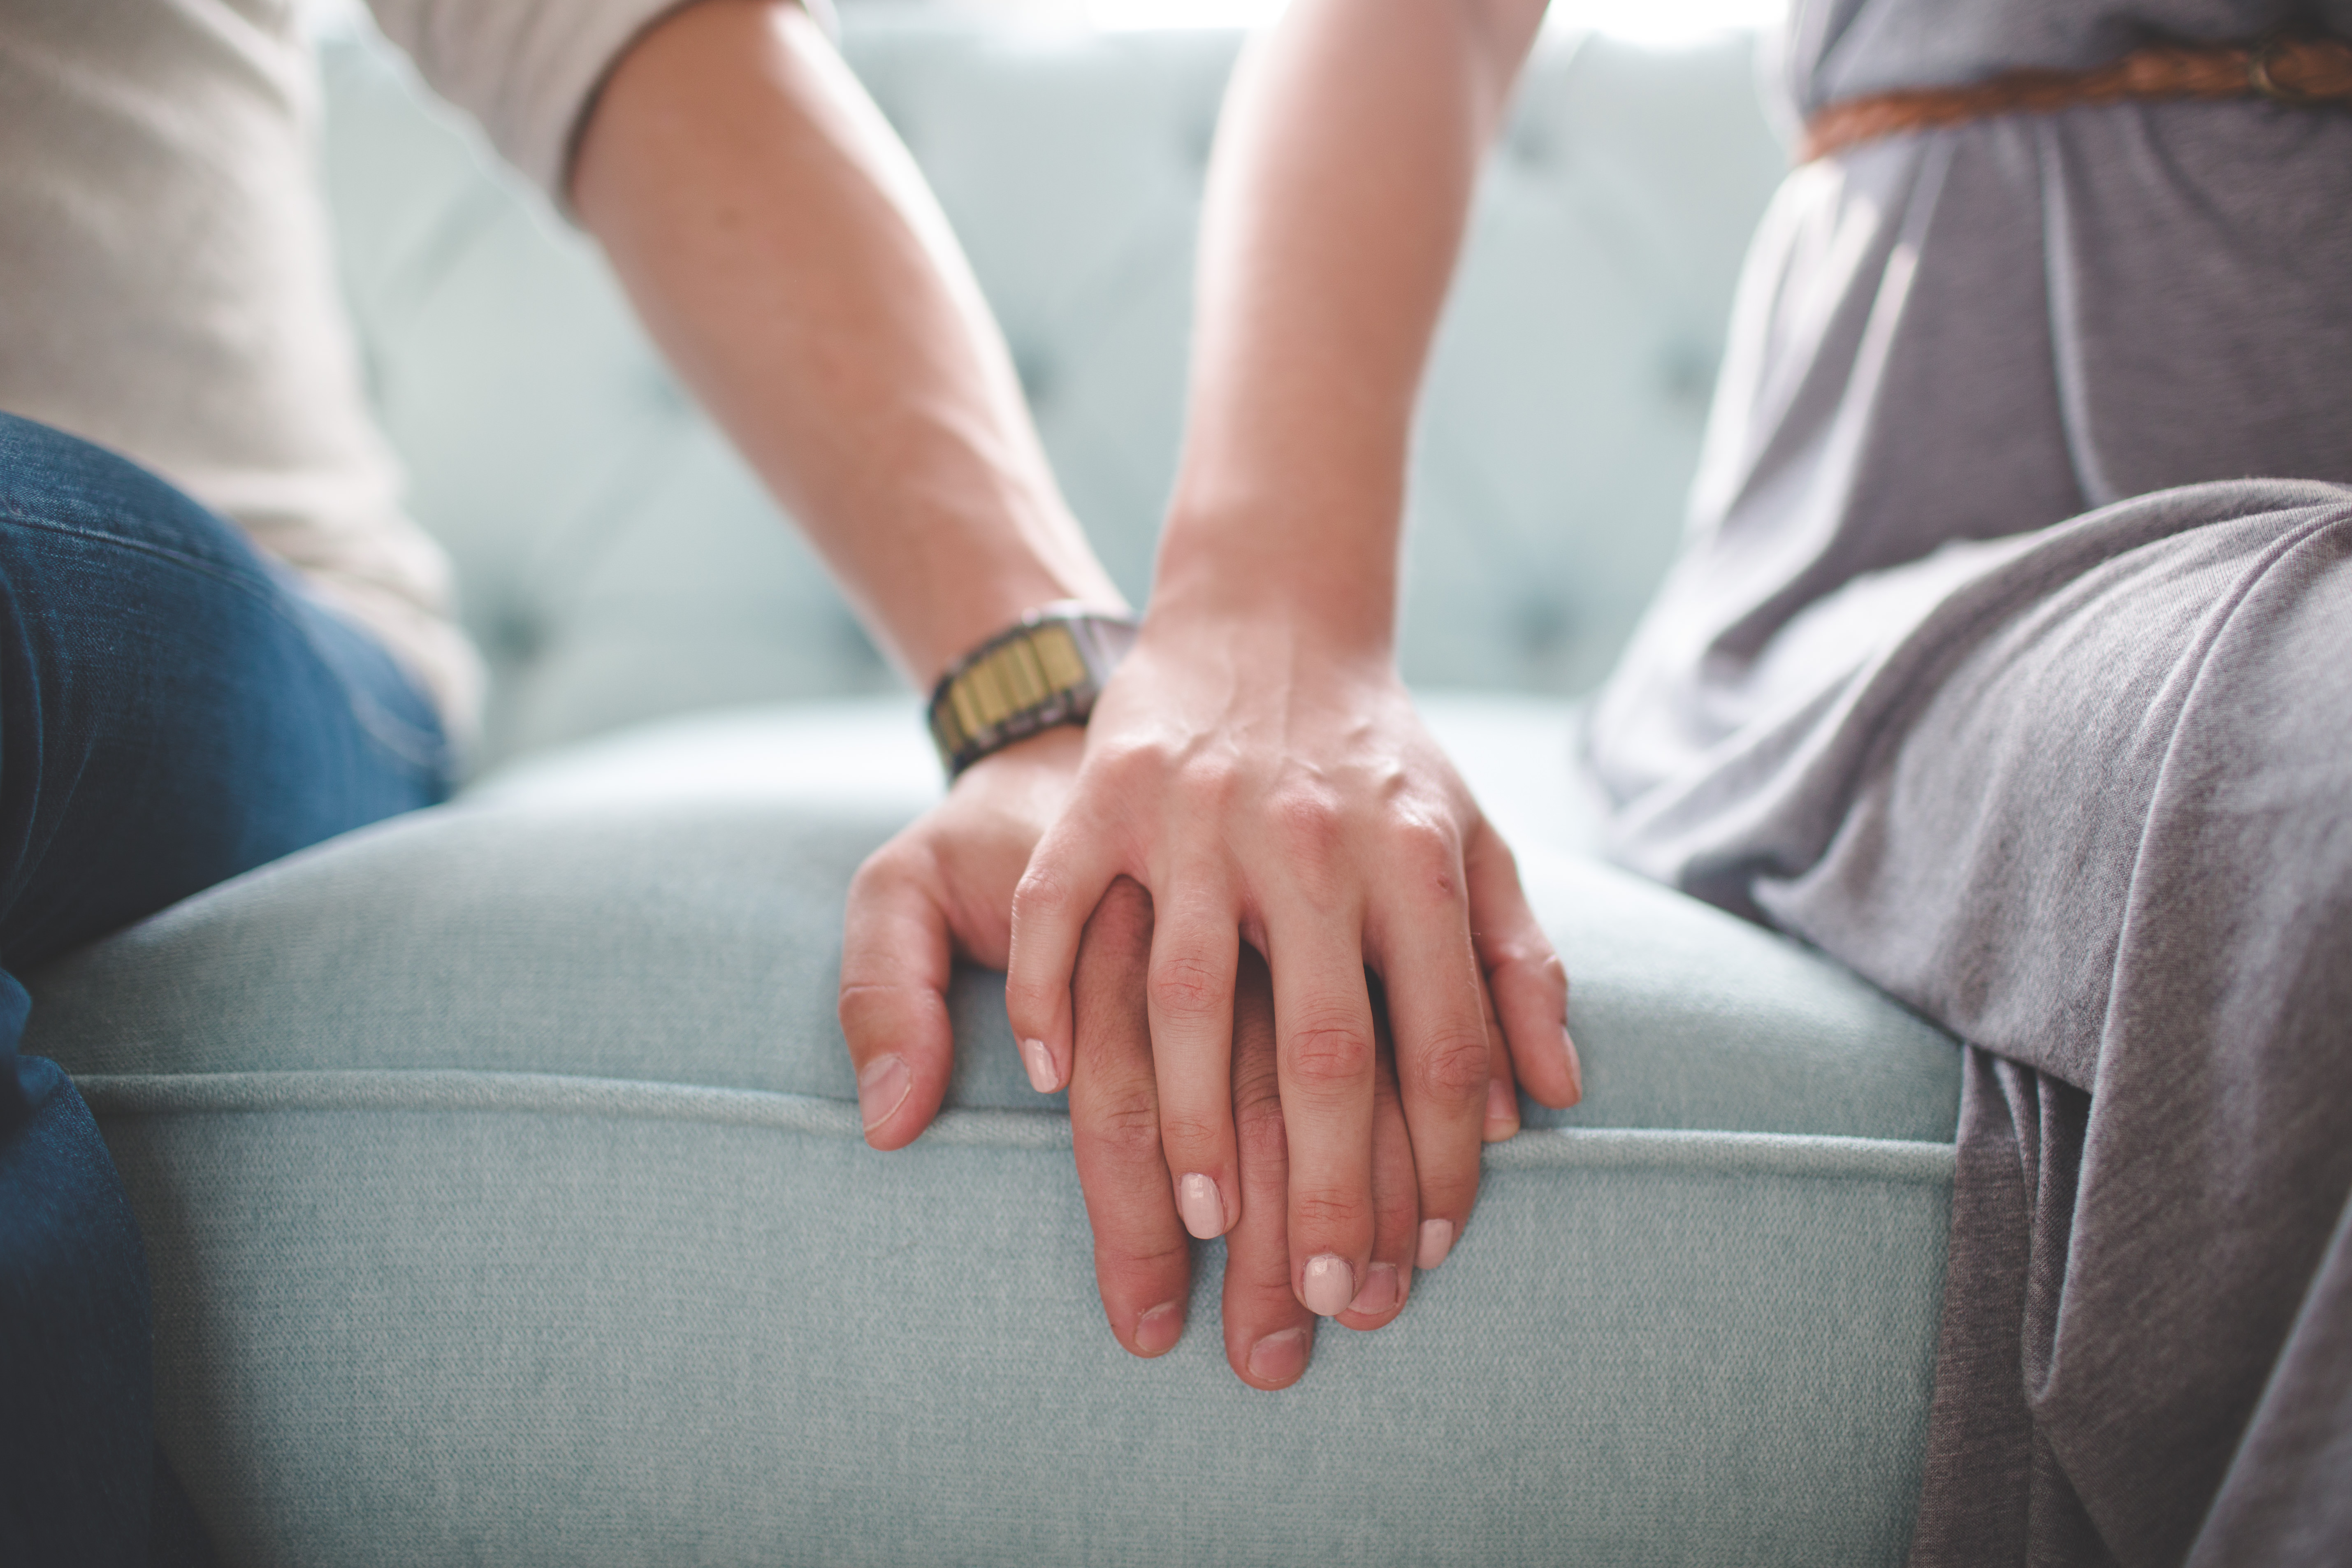 Husband and wife holding hands | Source: Getty Images